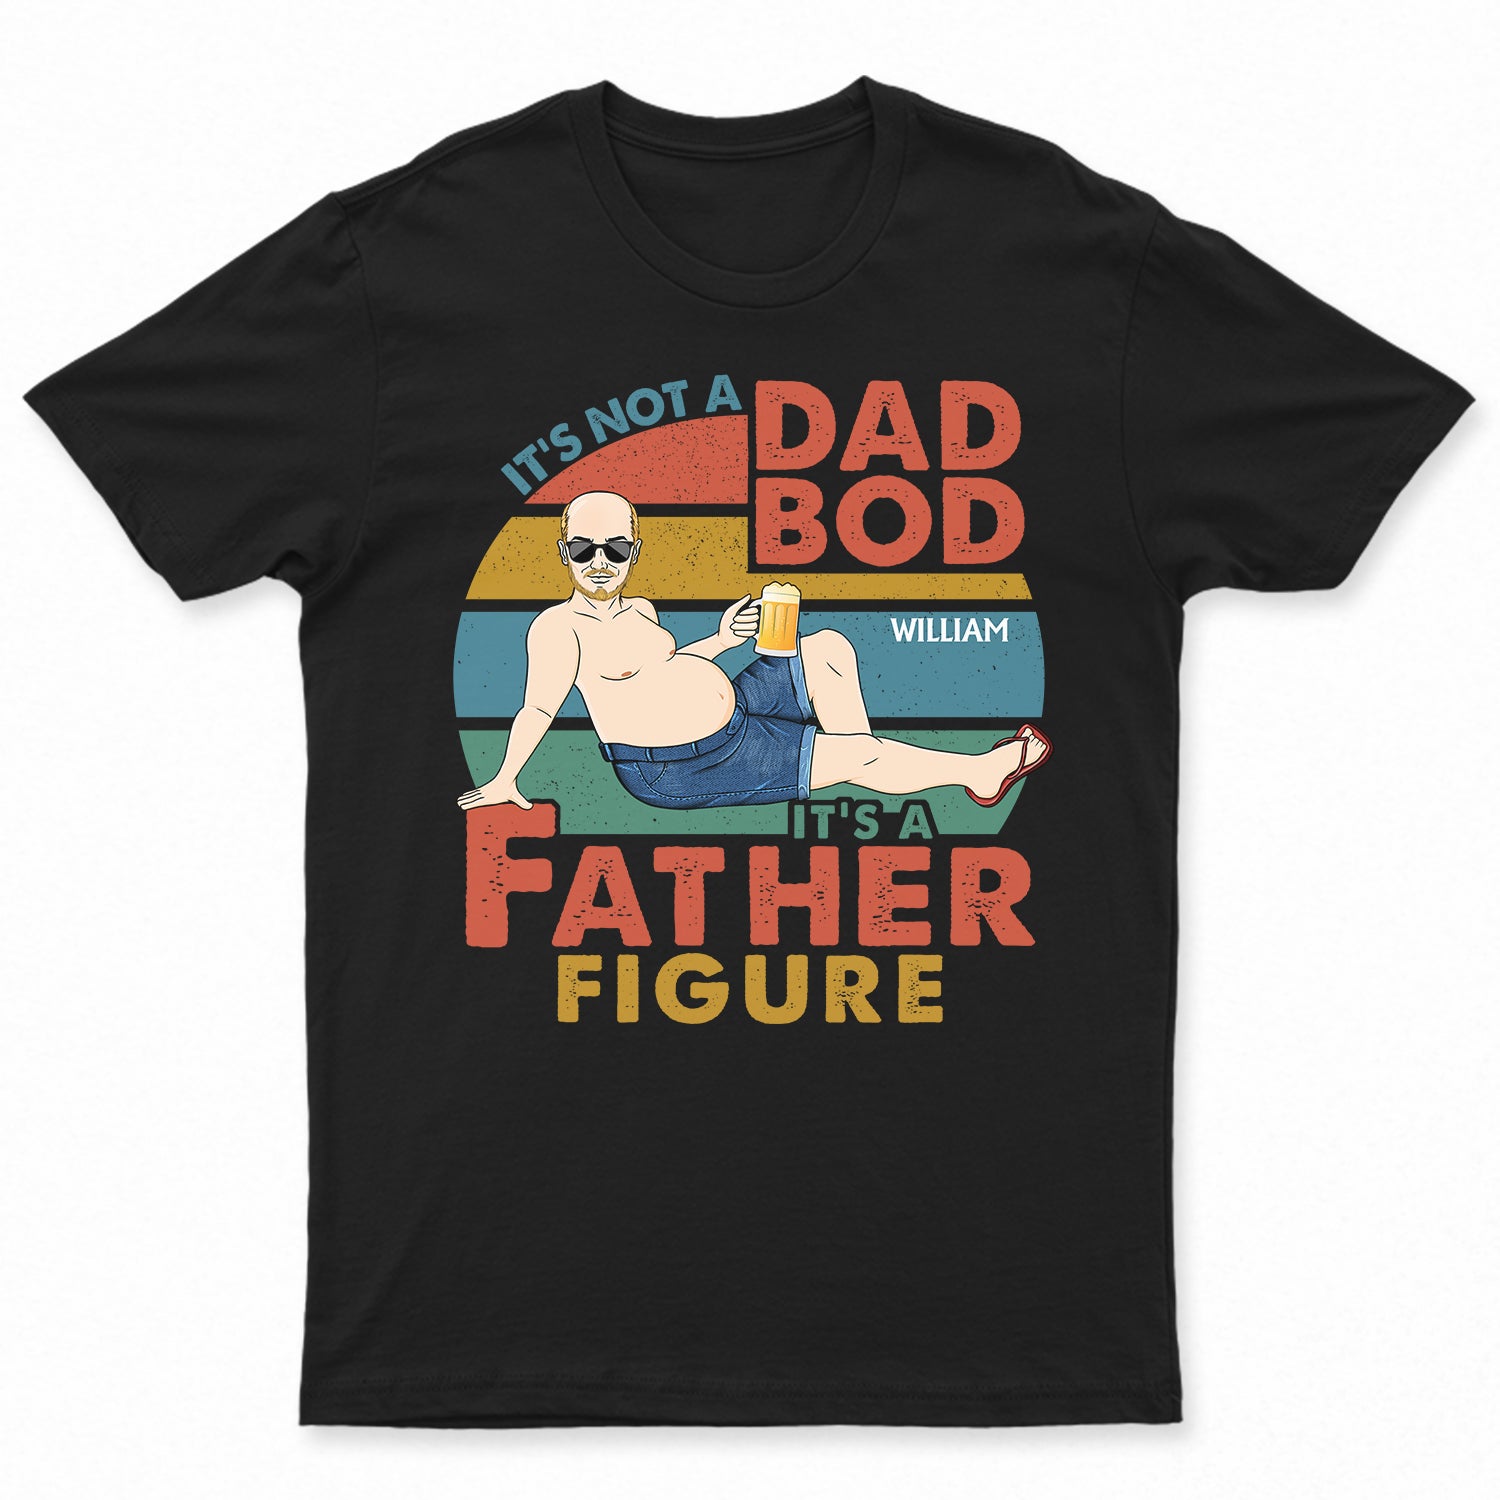 It's Not A Dad Bod It's Father Figure - Birthday, Loving Gift For Father, Papa, Grandpa, Grandfather - Personalized Custom T Shirt